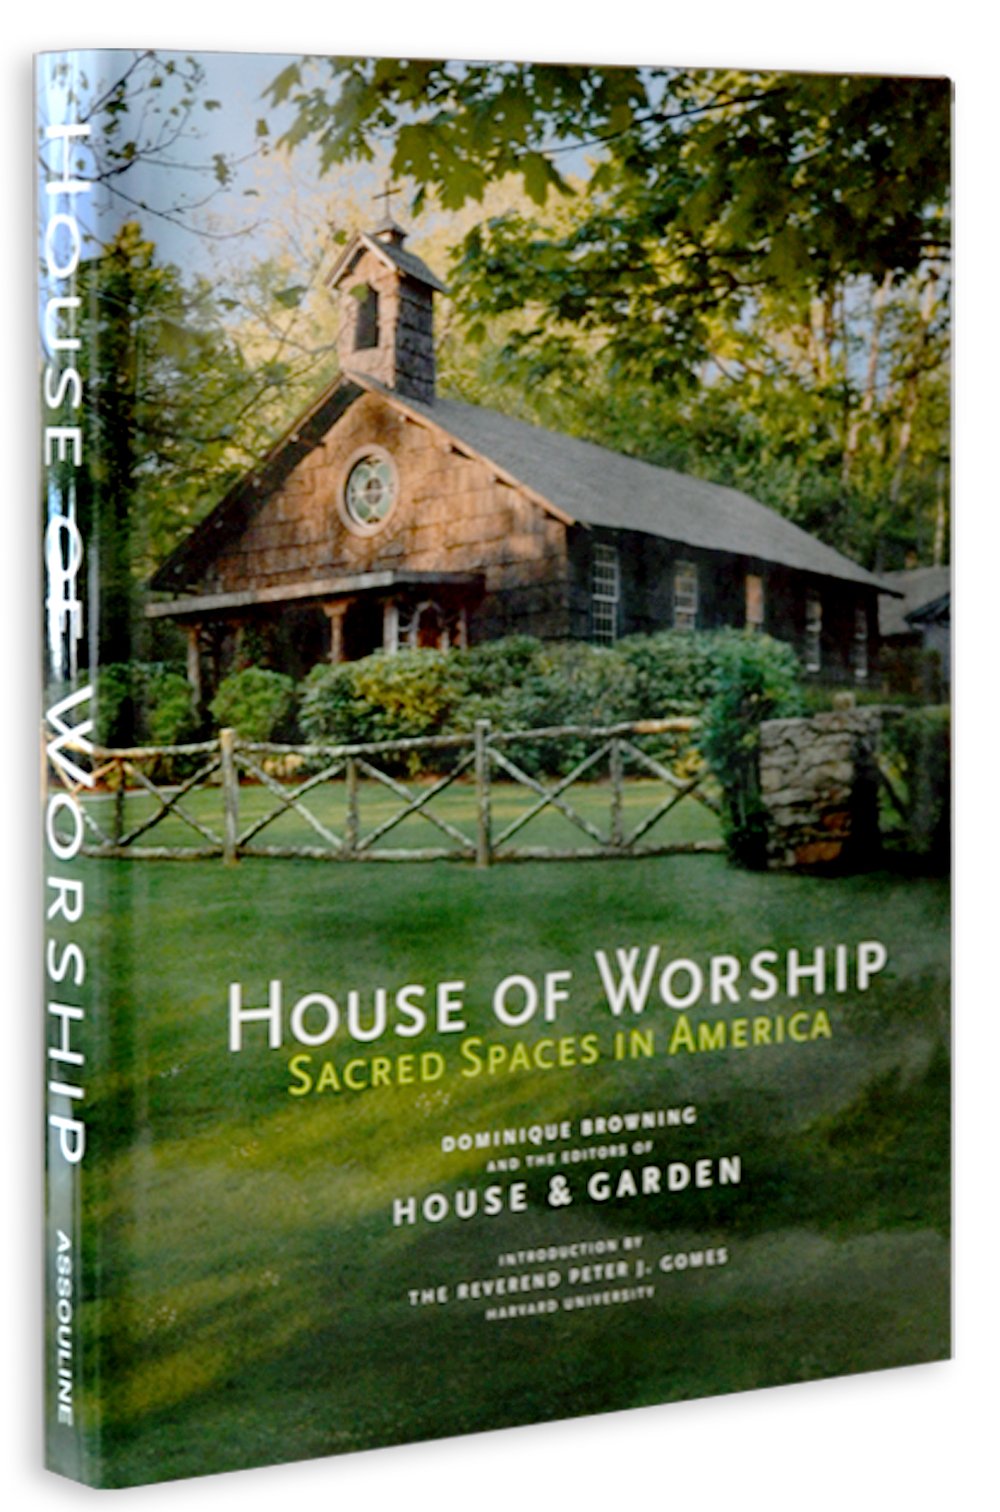 House of Worship. Sacred Space in America